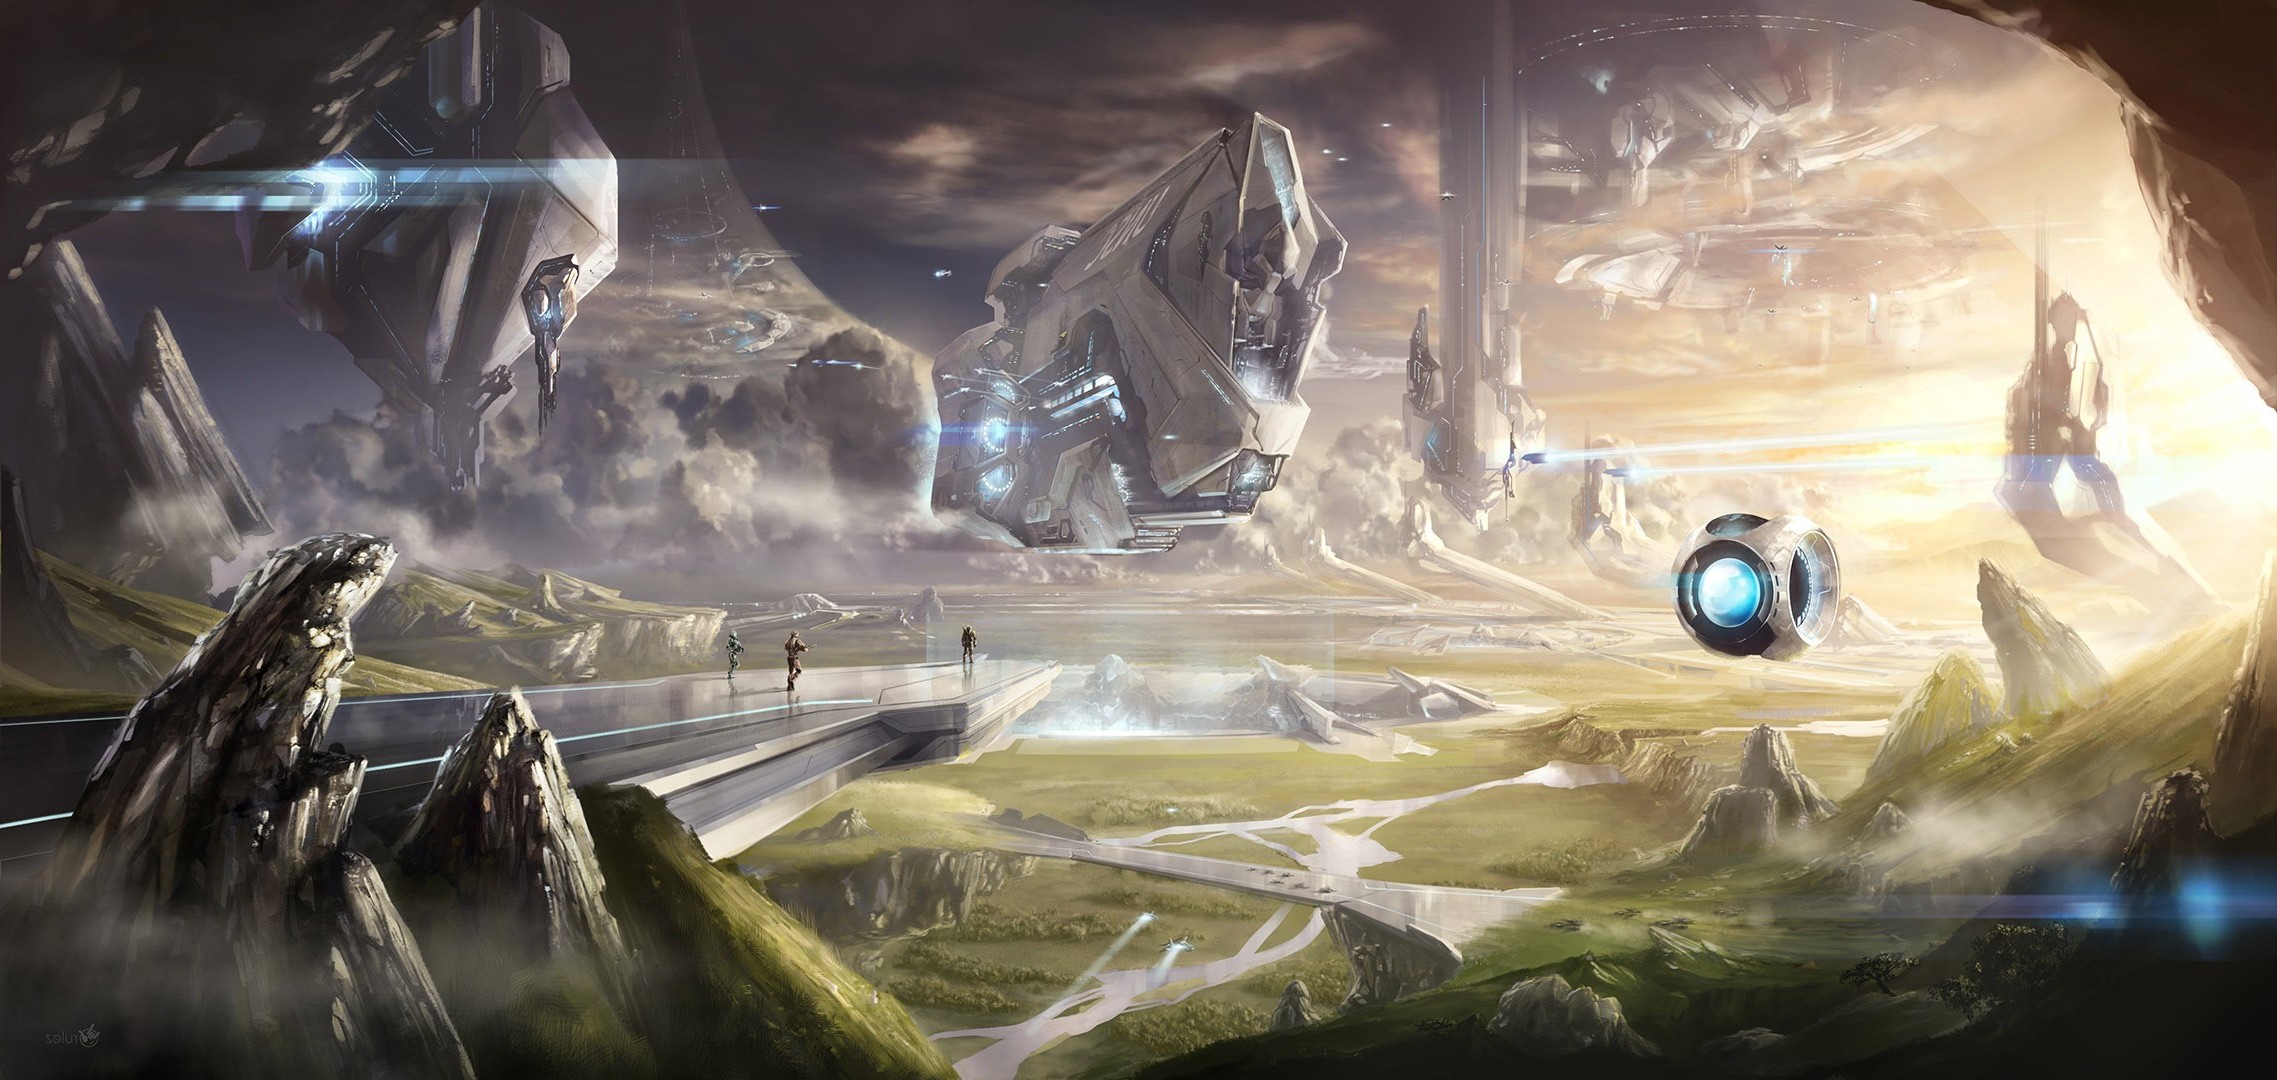 Halo, Master Chief, Xbox One, Halo: Master Chief Collection, 343 Industries, Fantasy Art Wallpaper